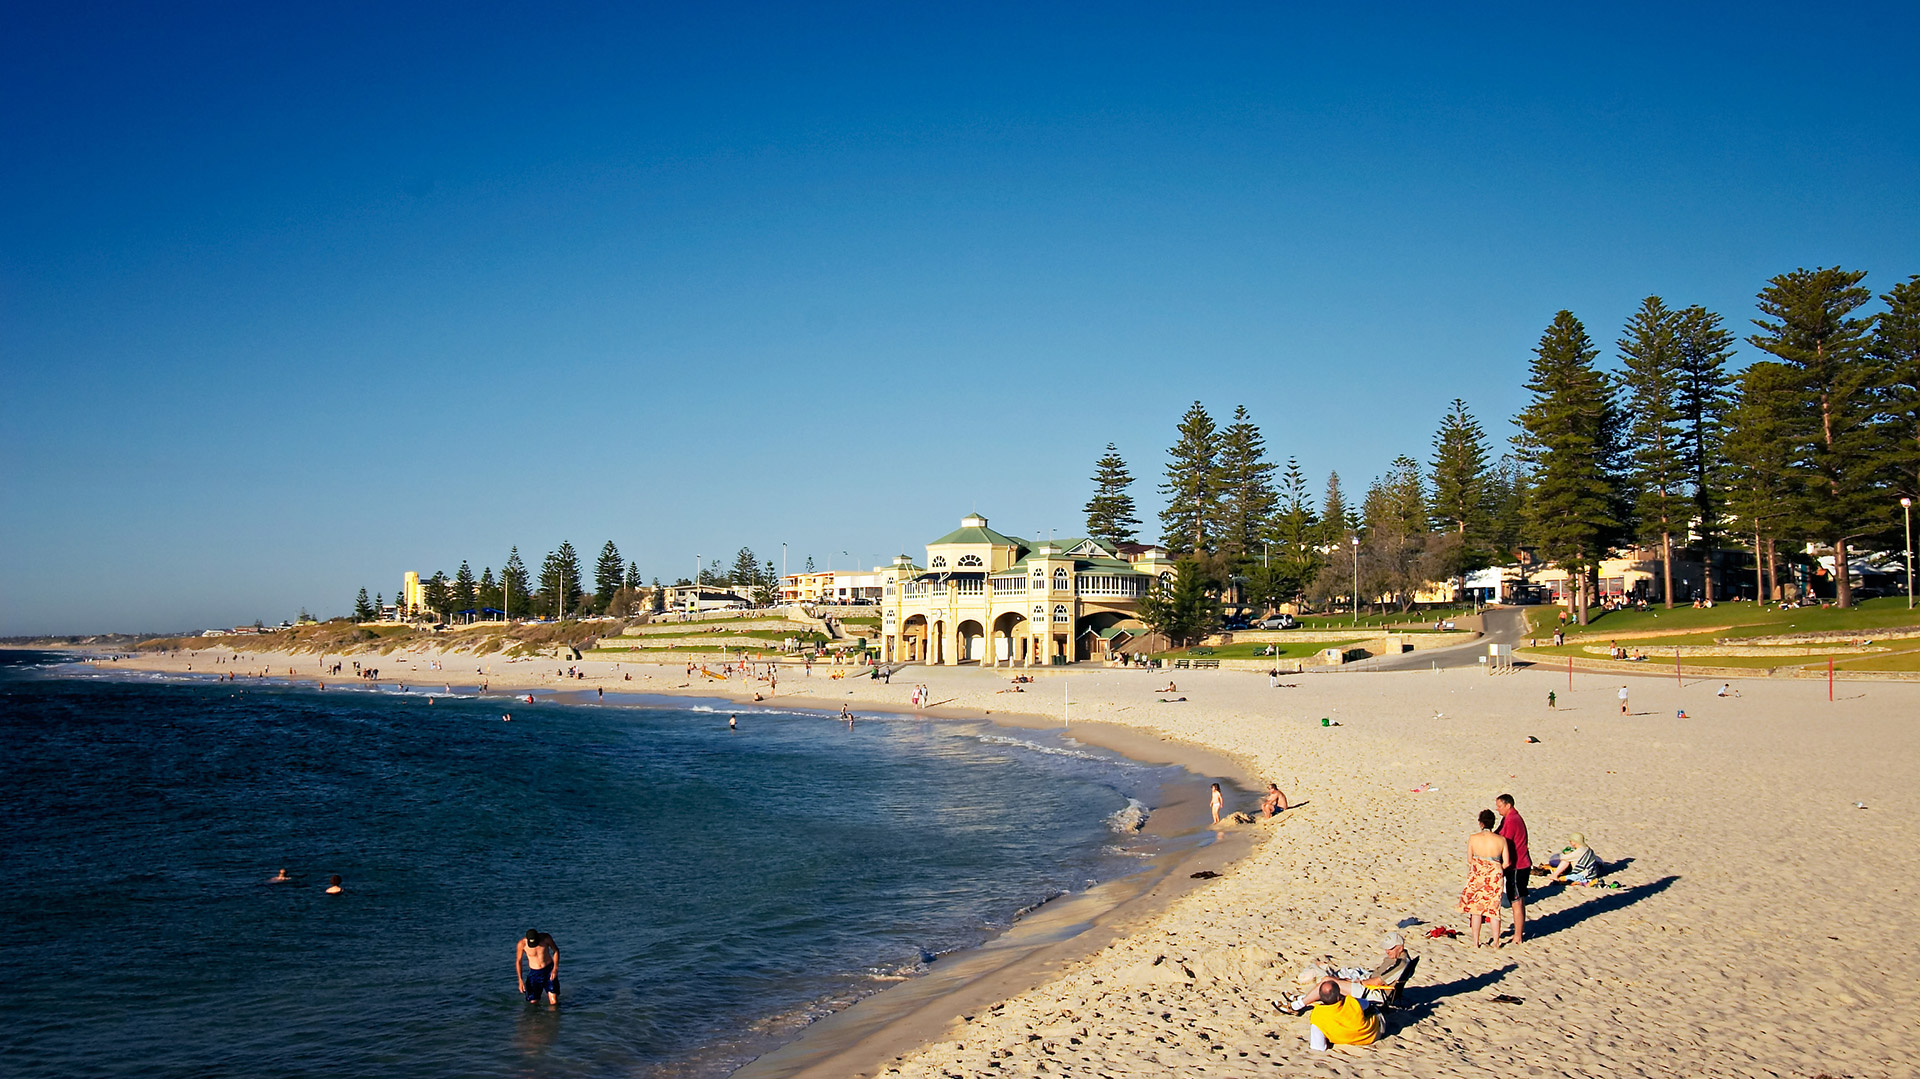 Perth Fremantle by DOMINIK PHOTOGRAPHY